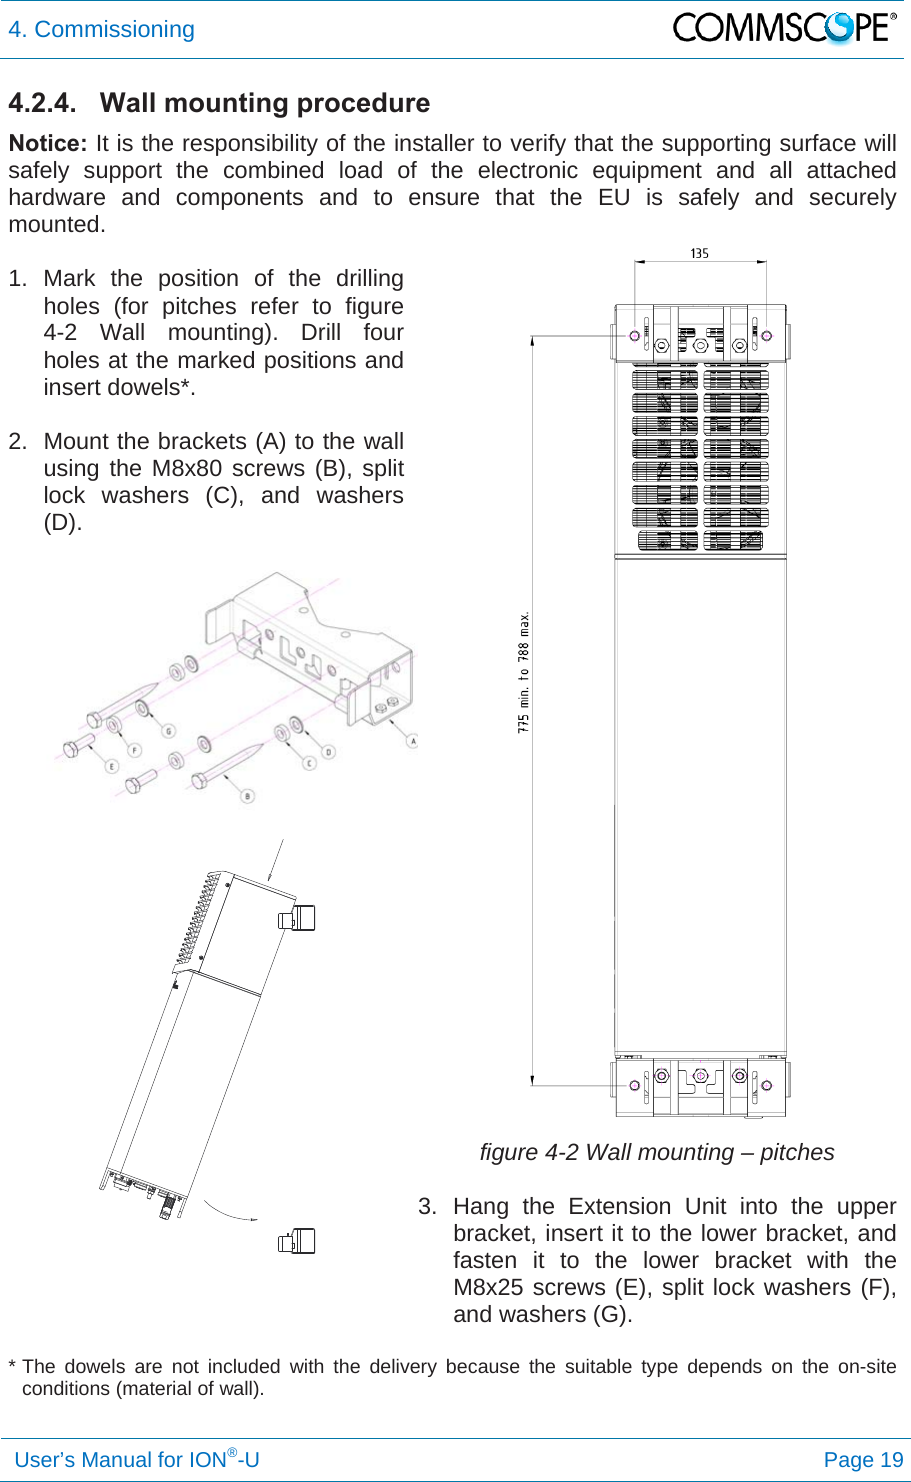 4. Commissioning   User’s Manual for ION®-U Page 19 4.2.4.  Wall mounting procedure Notice: It is the responsibility of the installer to verify that the supporting surface will safely support the combined load of the electronic equipment and all attached hardware and components and to ensure that the EU is safely and securely mounted.  1. Mark the position of the drilling holes (for pitches refer to figure 4-2 Wall mounting). Drill four holes at the marked positions and insert dowels*.  2.  Mount the brackets (A) to the wall using the M8x80 screws (B), split lock washers (C), and washers (D).      figure 4-2 Wall mounting – pitches  3. Hang the Extension Unit into the upper bracket, insert it to the lower bracket, and fasten it to the lower bracket with the M8x25 screws (E), split lock washers (F), and washers (G).   * The dowels are not included with the delivery because the suitable type depends on the on-site conditions (material of wall).  